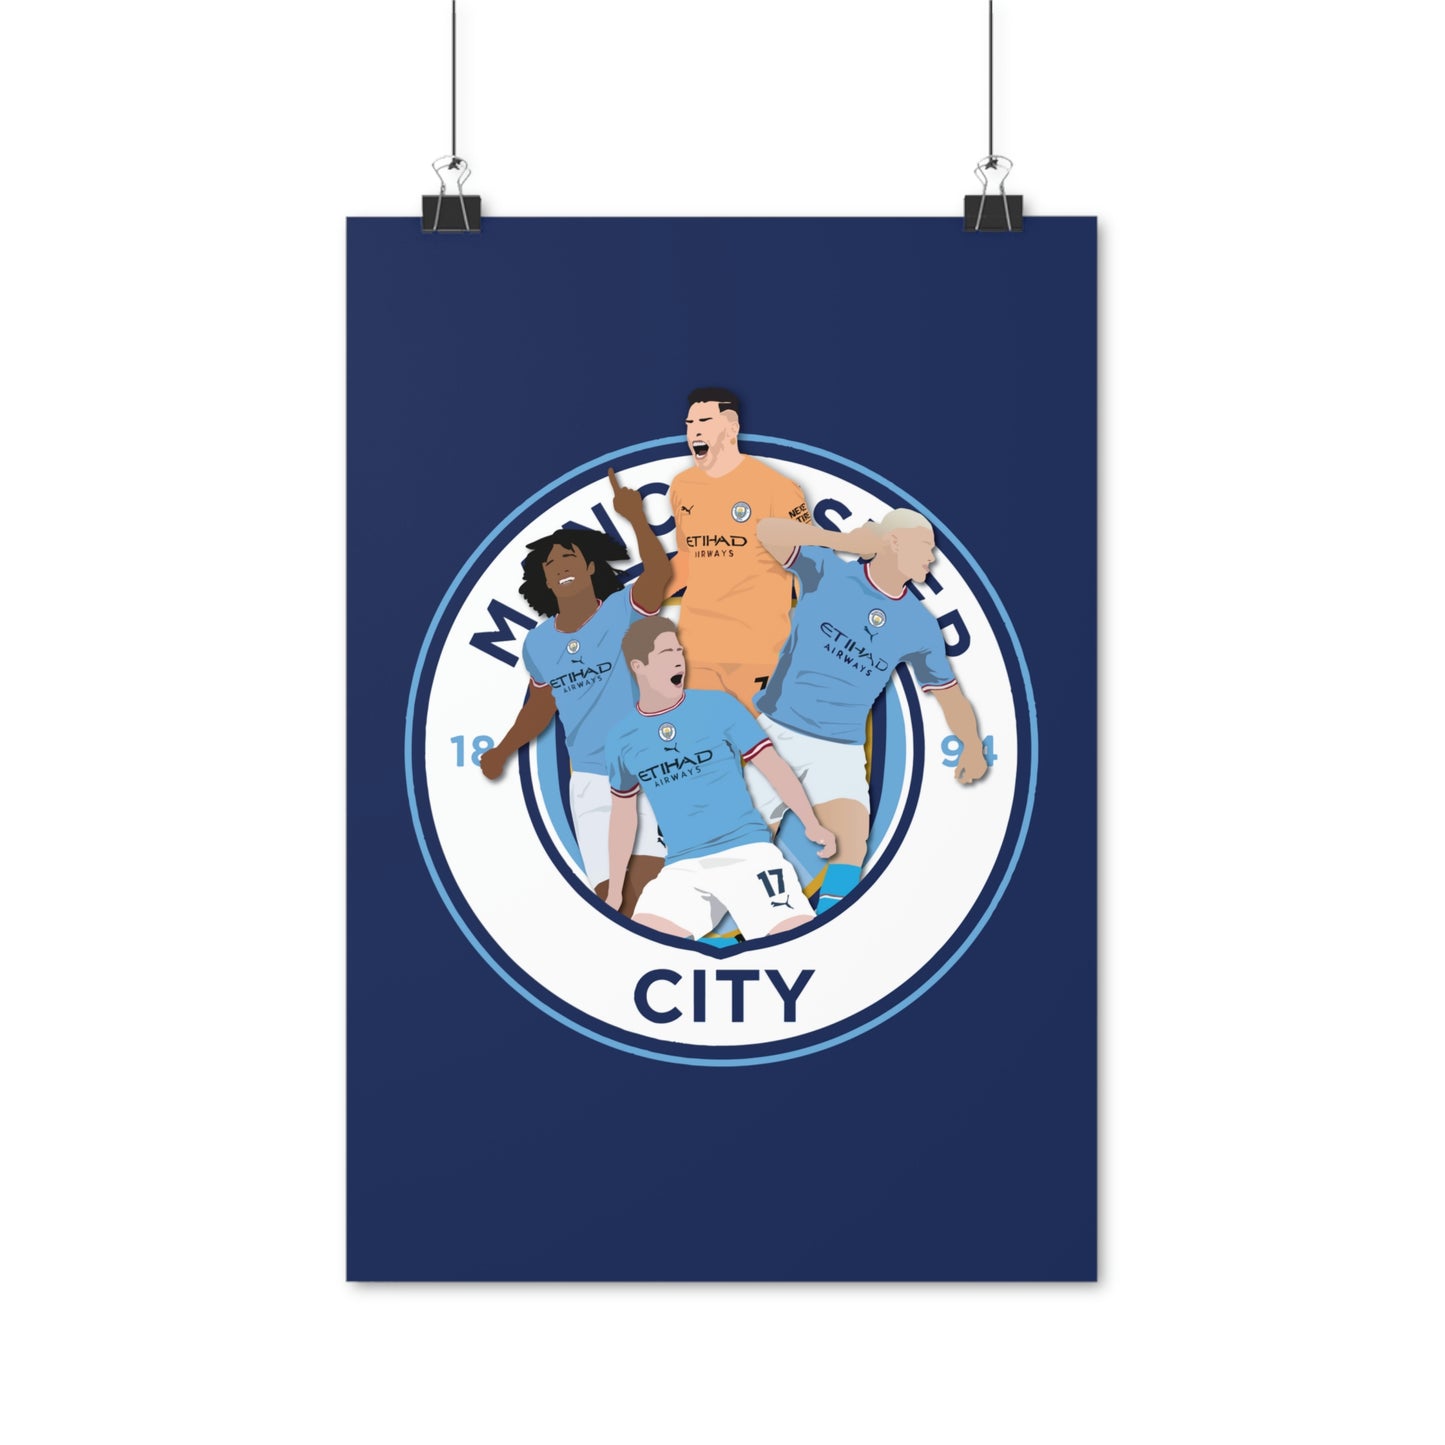 Manchester City poster with players Ederson, Ake, Haaland and De Bruyne (Blue background)